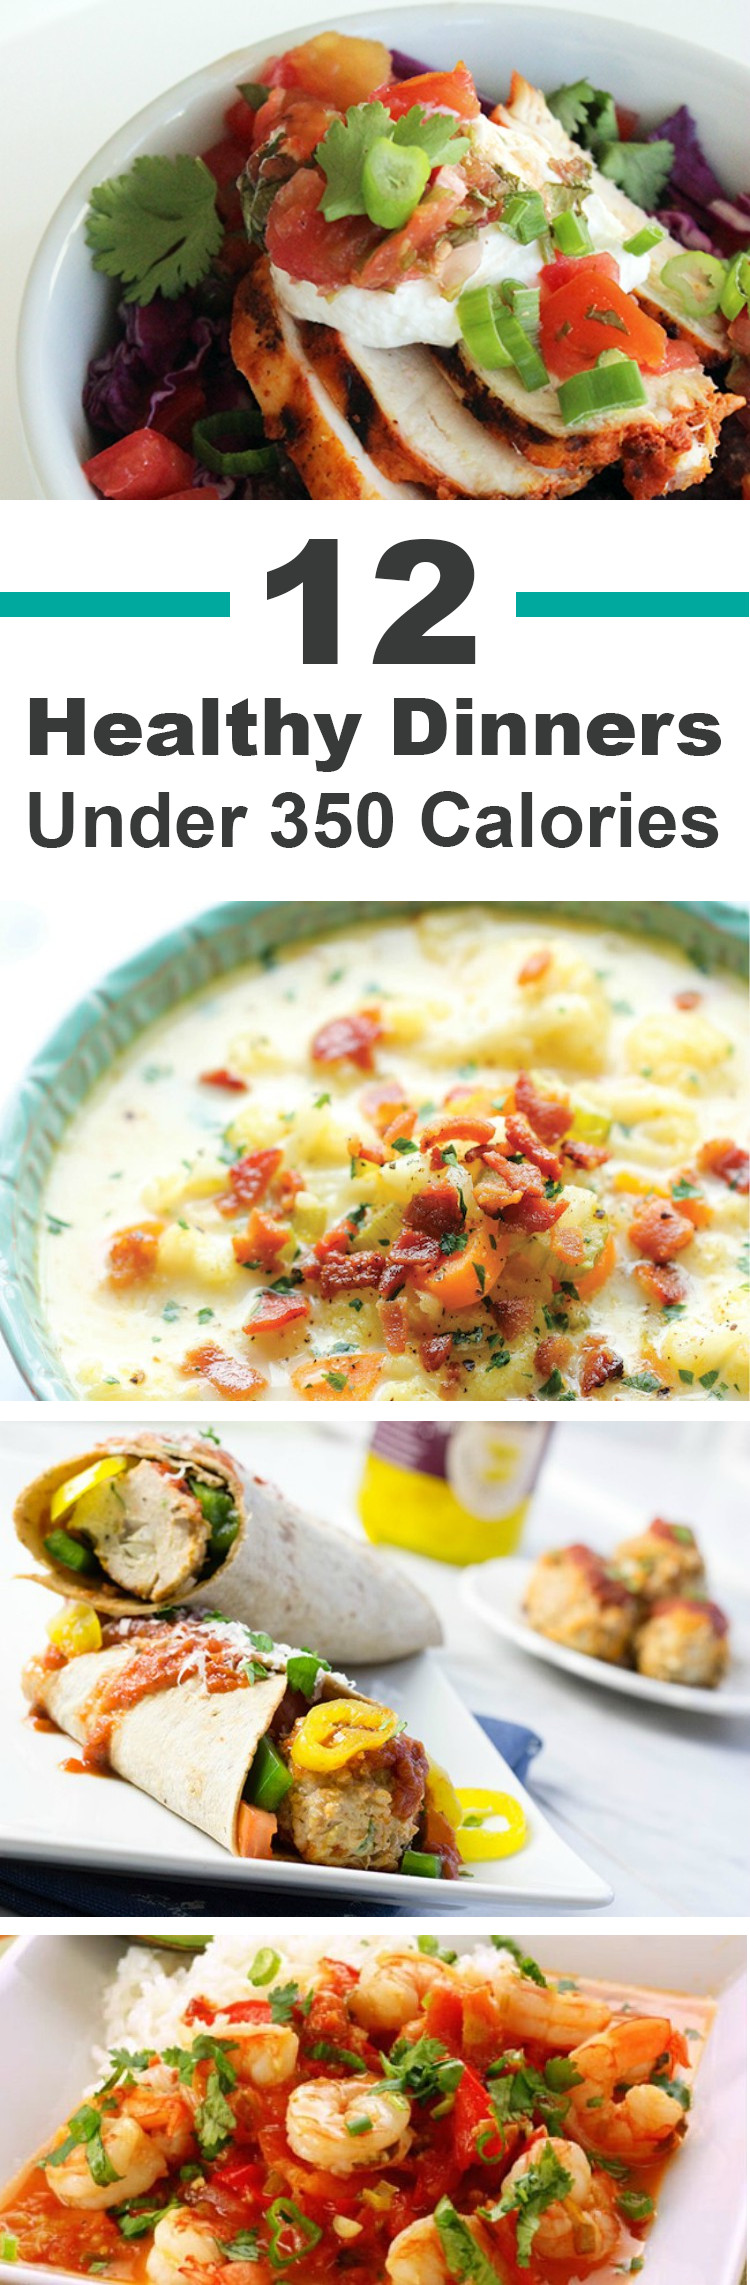 Healthy Low Cal Dinners
 12 Healthy Dinners Under 350 Calories